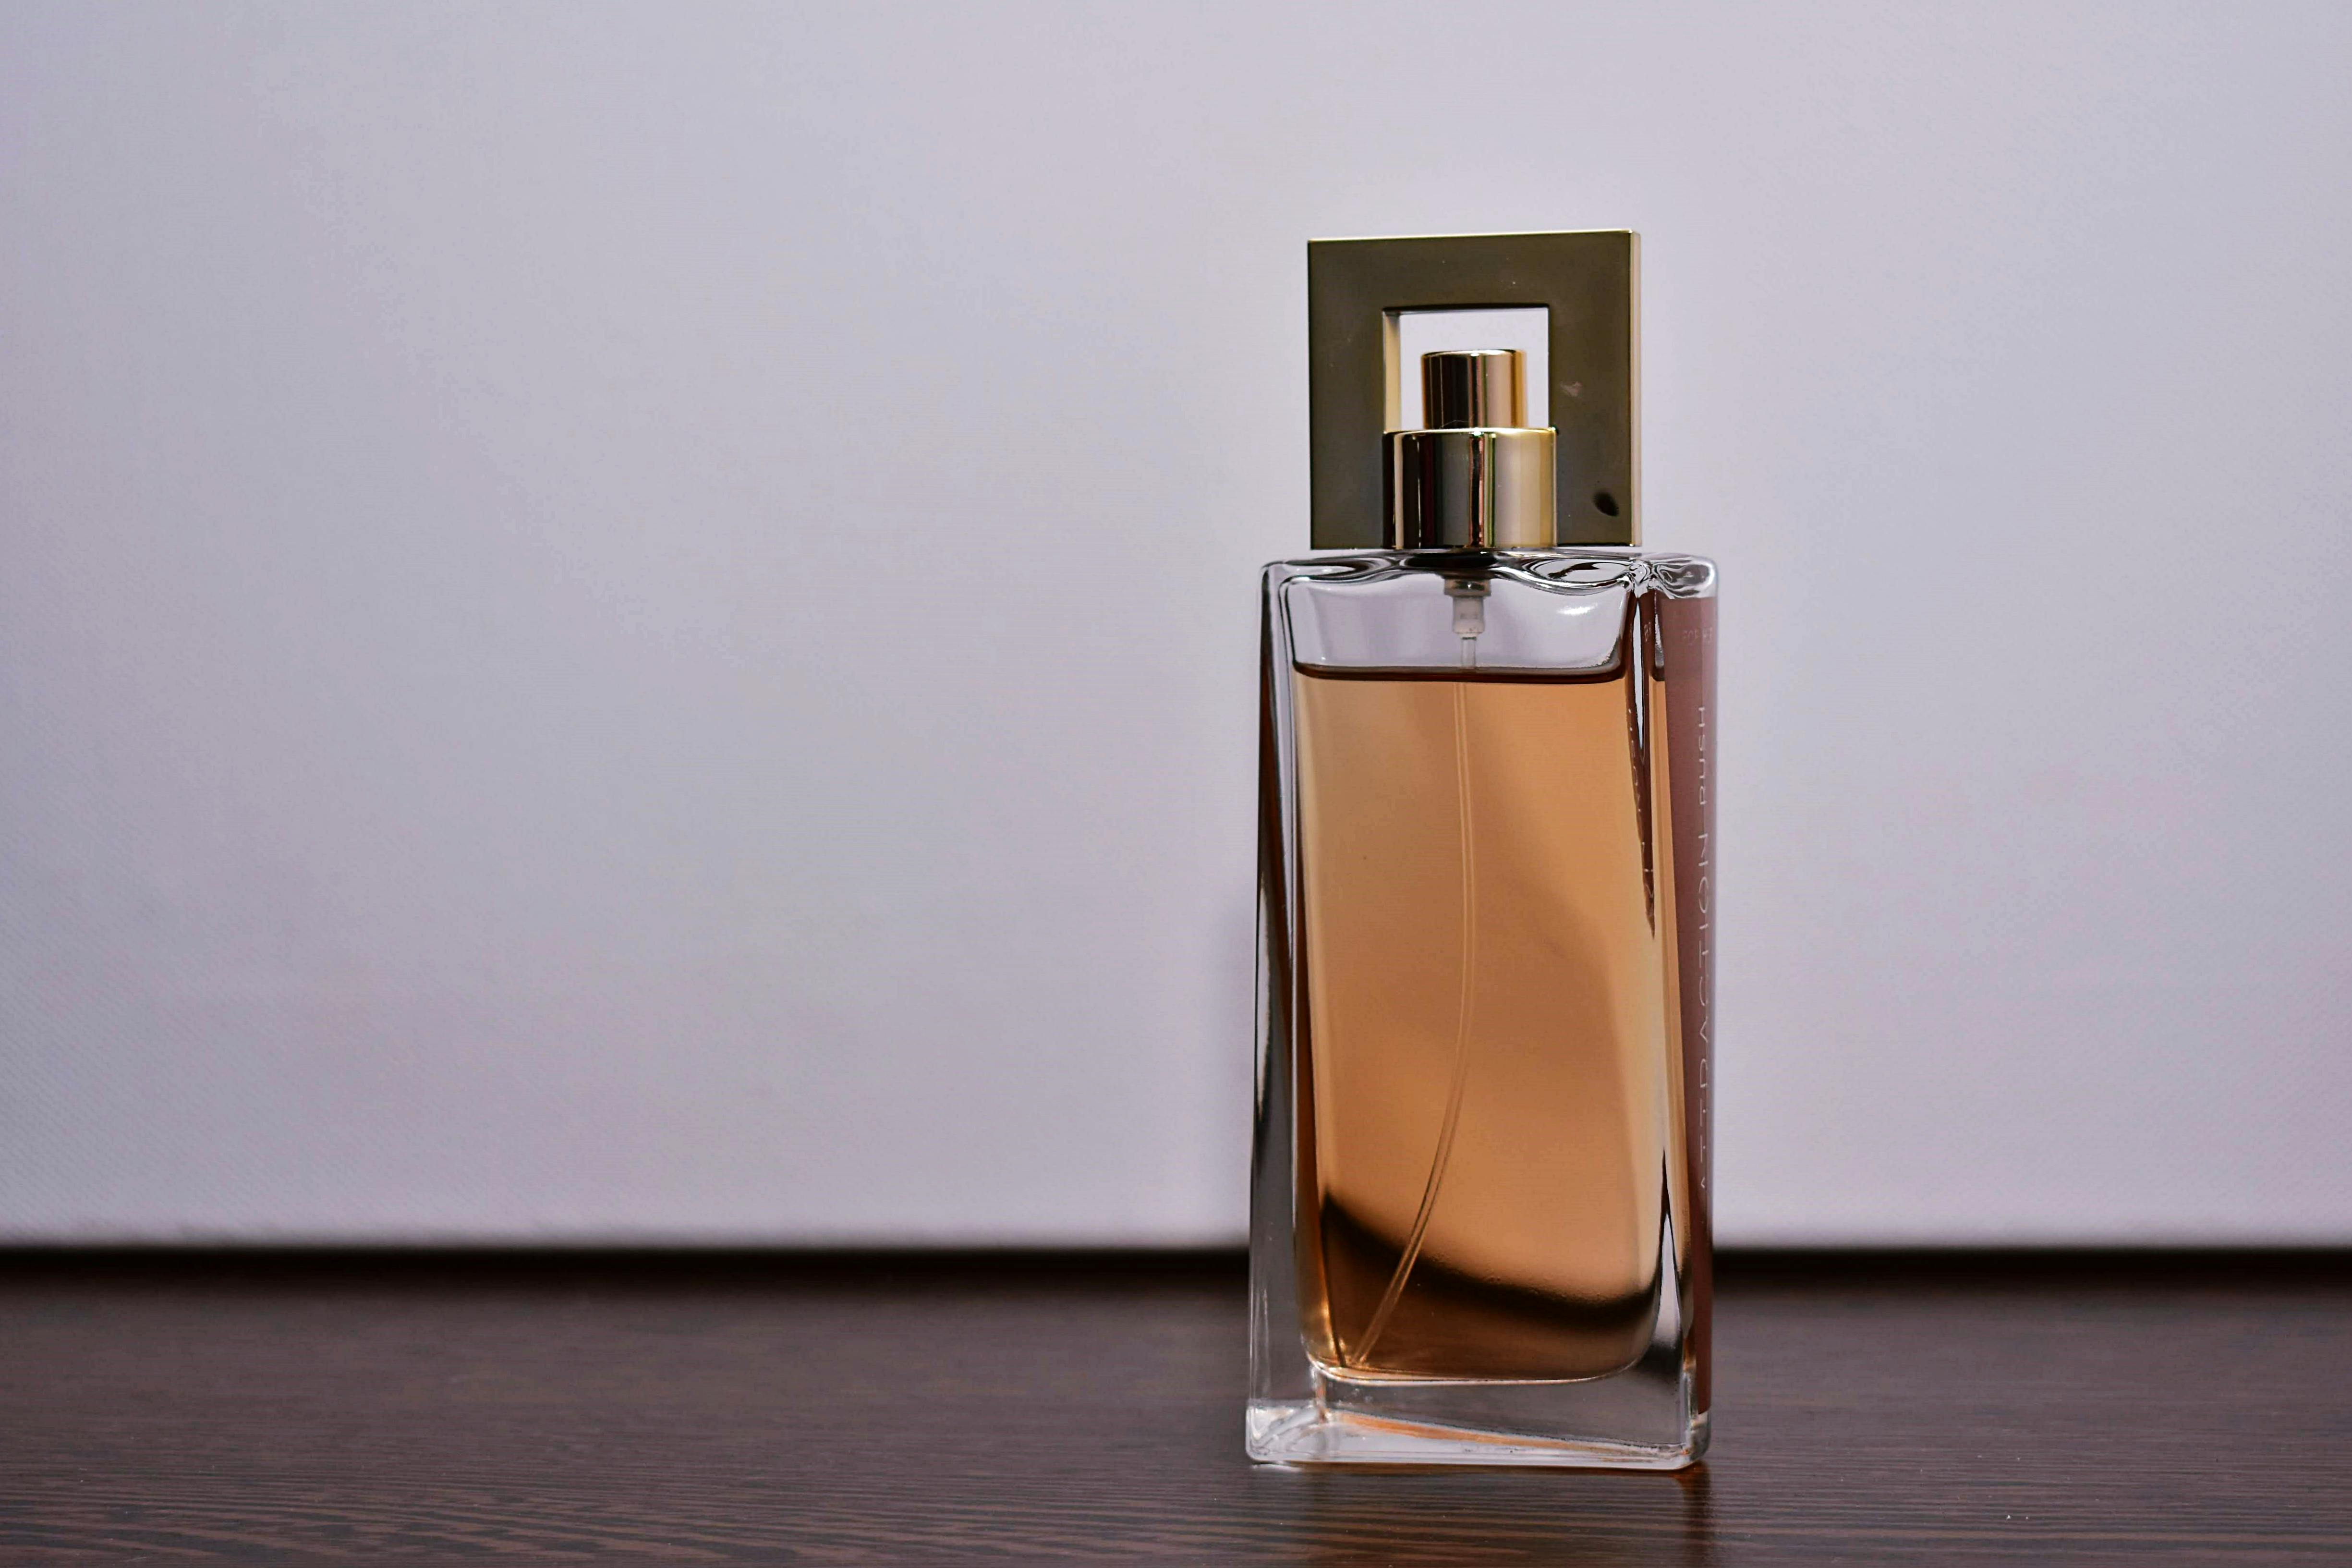 Perfume Photos, Download The BEST Free Perfume Stock Photos & HD Images